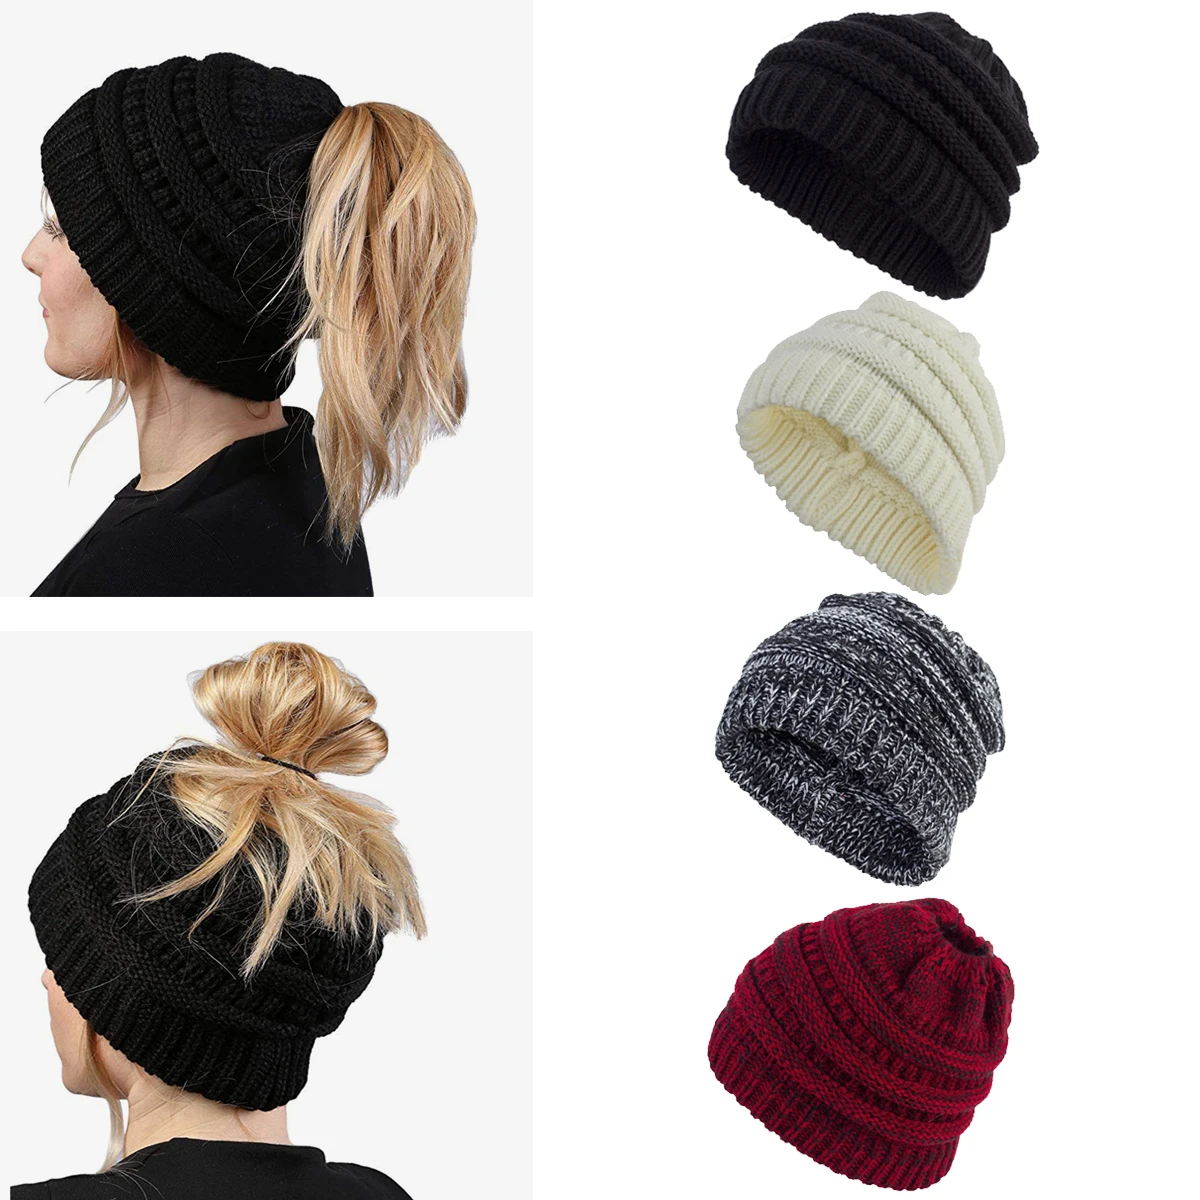 

2023 New Women Hats Autumn Winter Ponytail Beanie Hat Warmer Solid Color Lady Stretch Knitted Crochet Beanies Hats Cap Outdoor